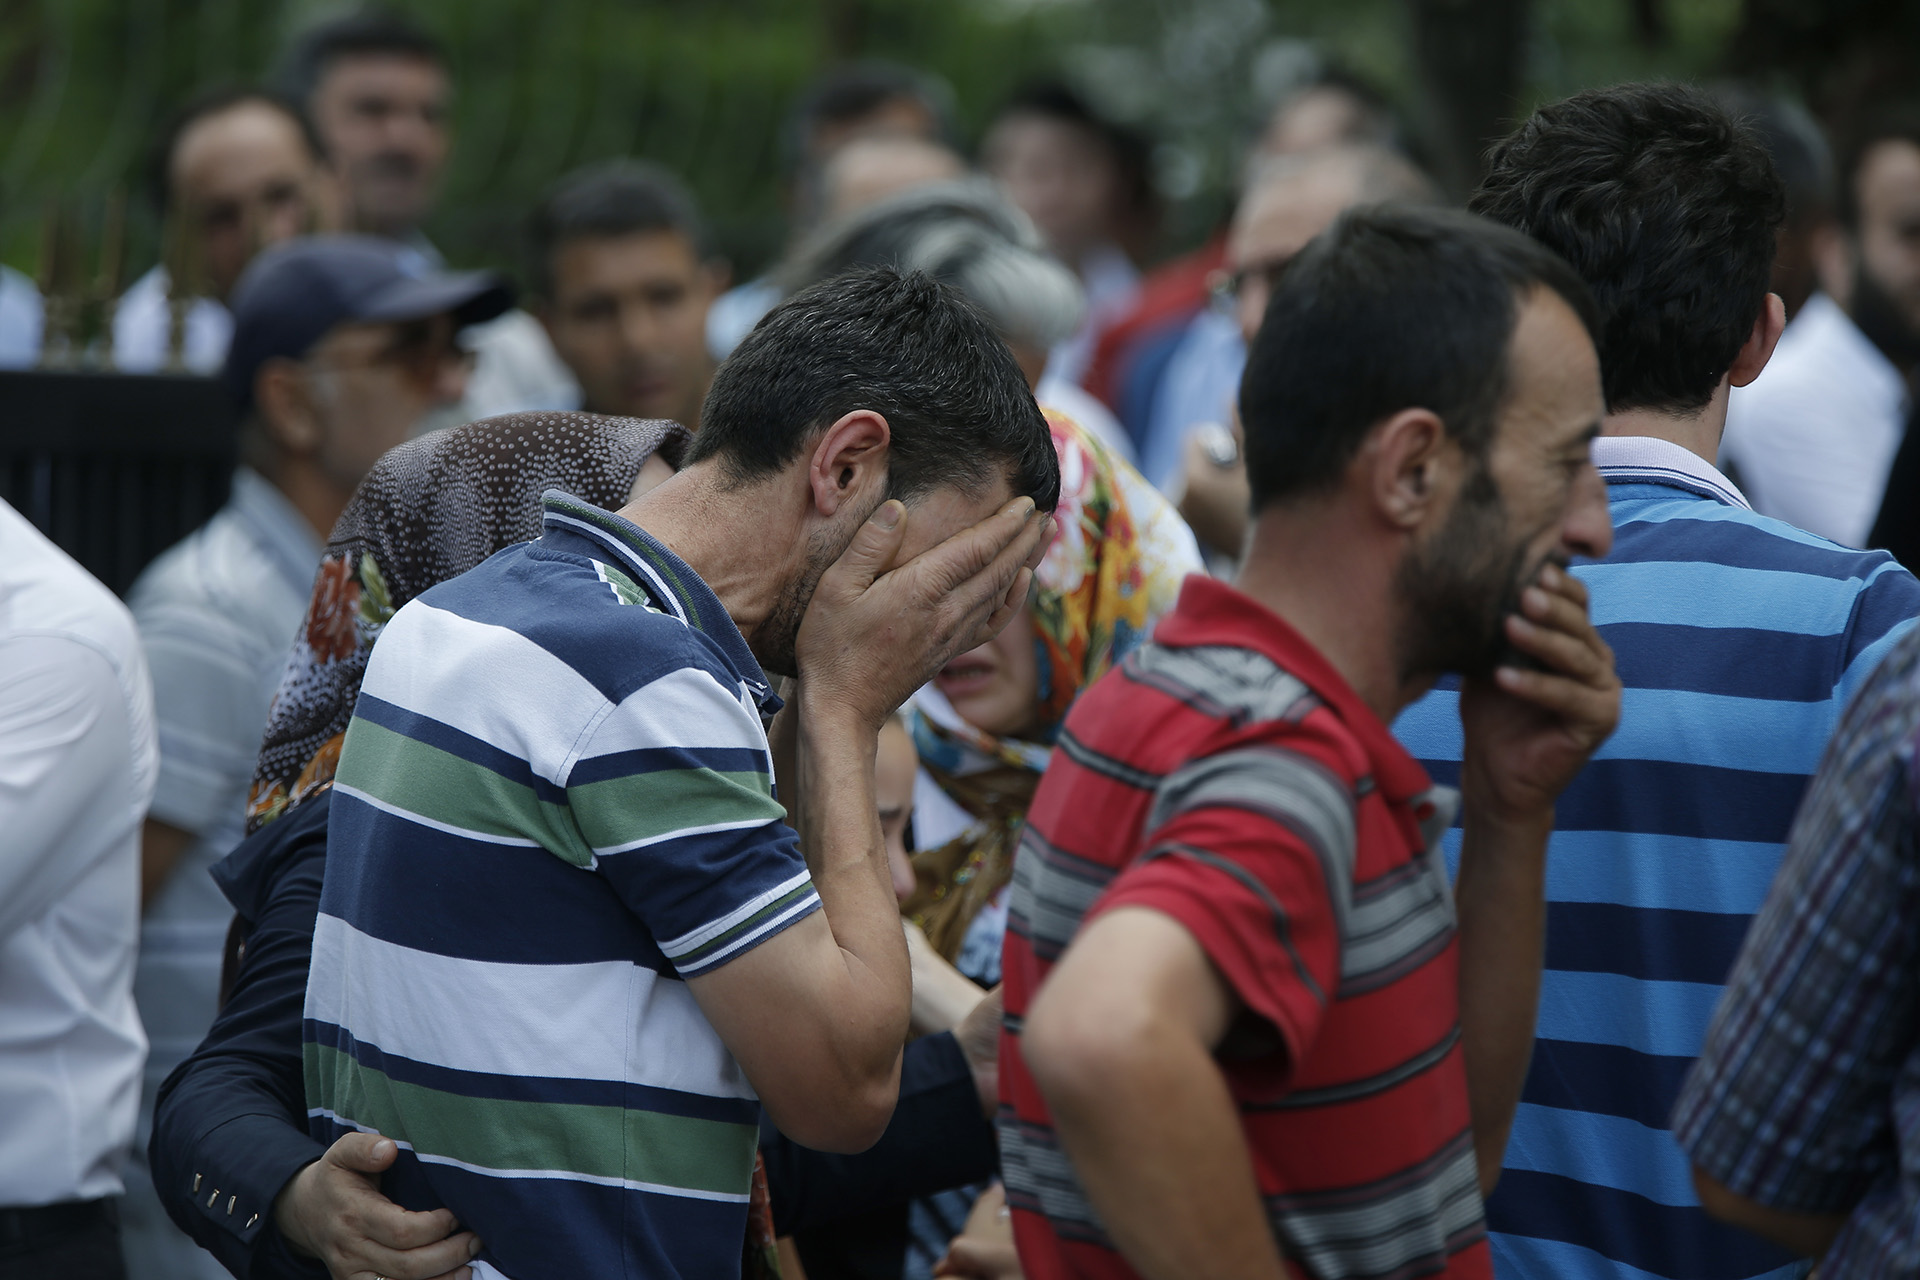 Family members of victims cry outside the Forensic Medical Center in Istanbul, Wednesday, June 29, 2016. Turkish authorities have banned distribution of images relating to the Ataturk airport attack within Turkey.(AP Photo/Emrah Gurel)